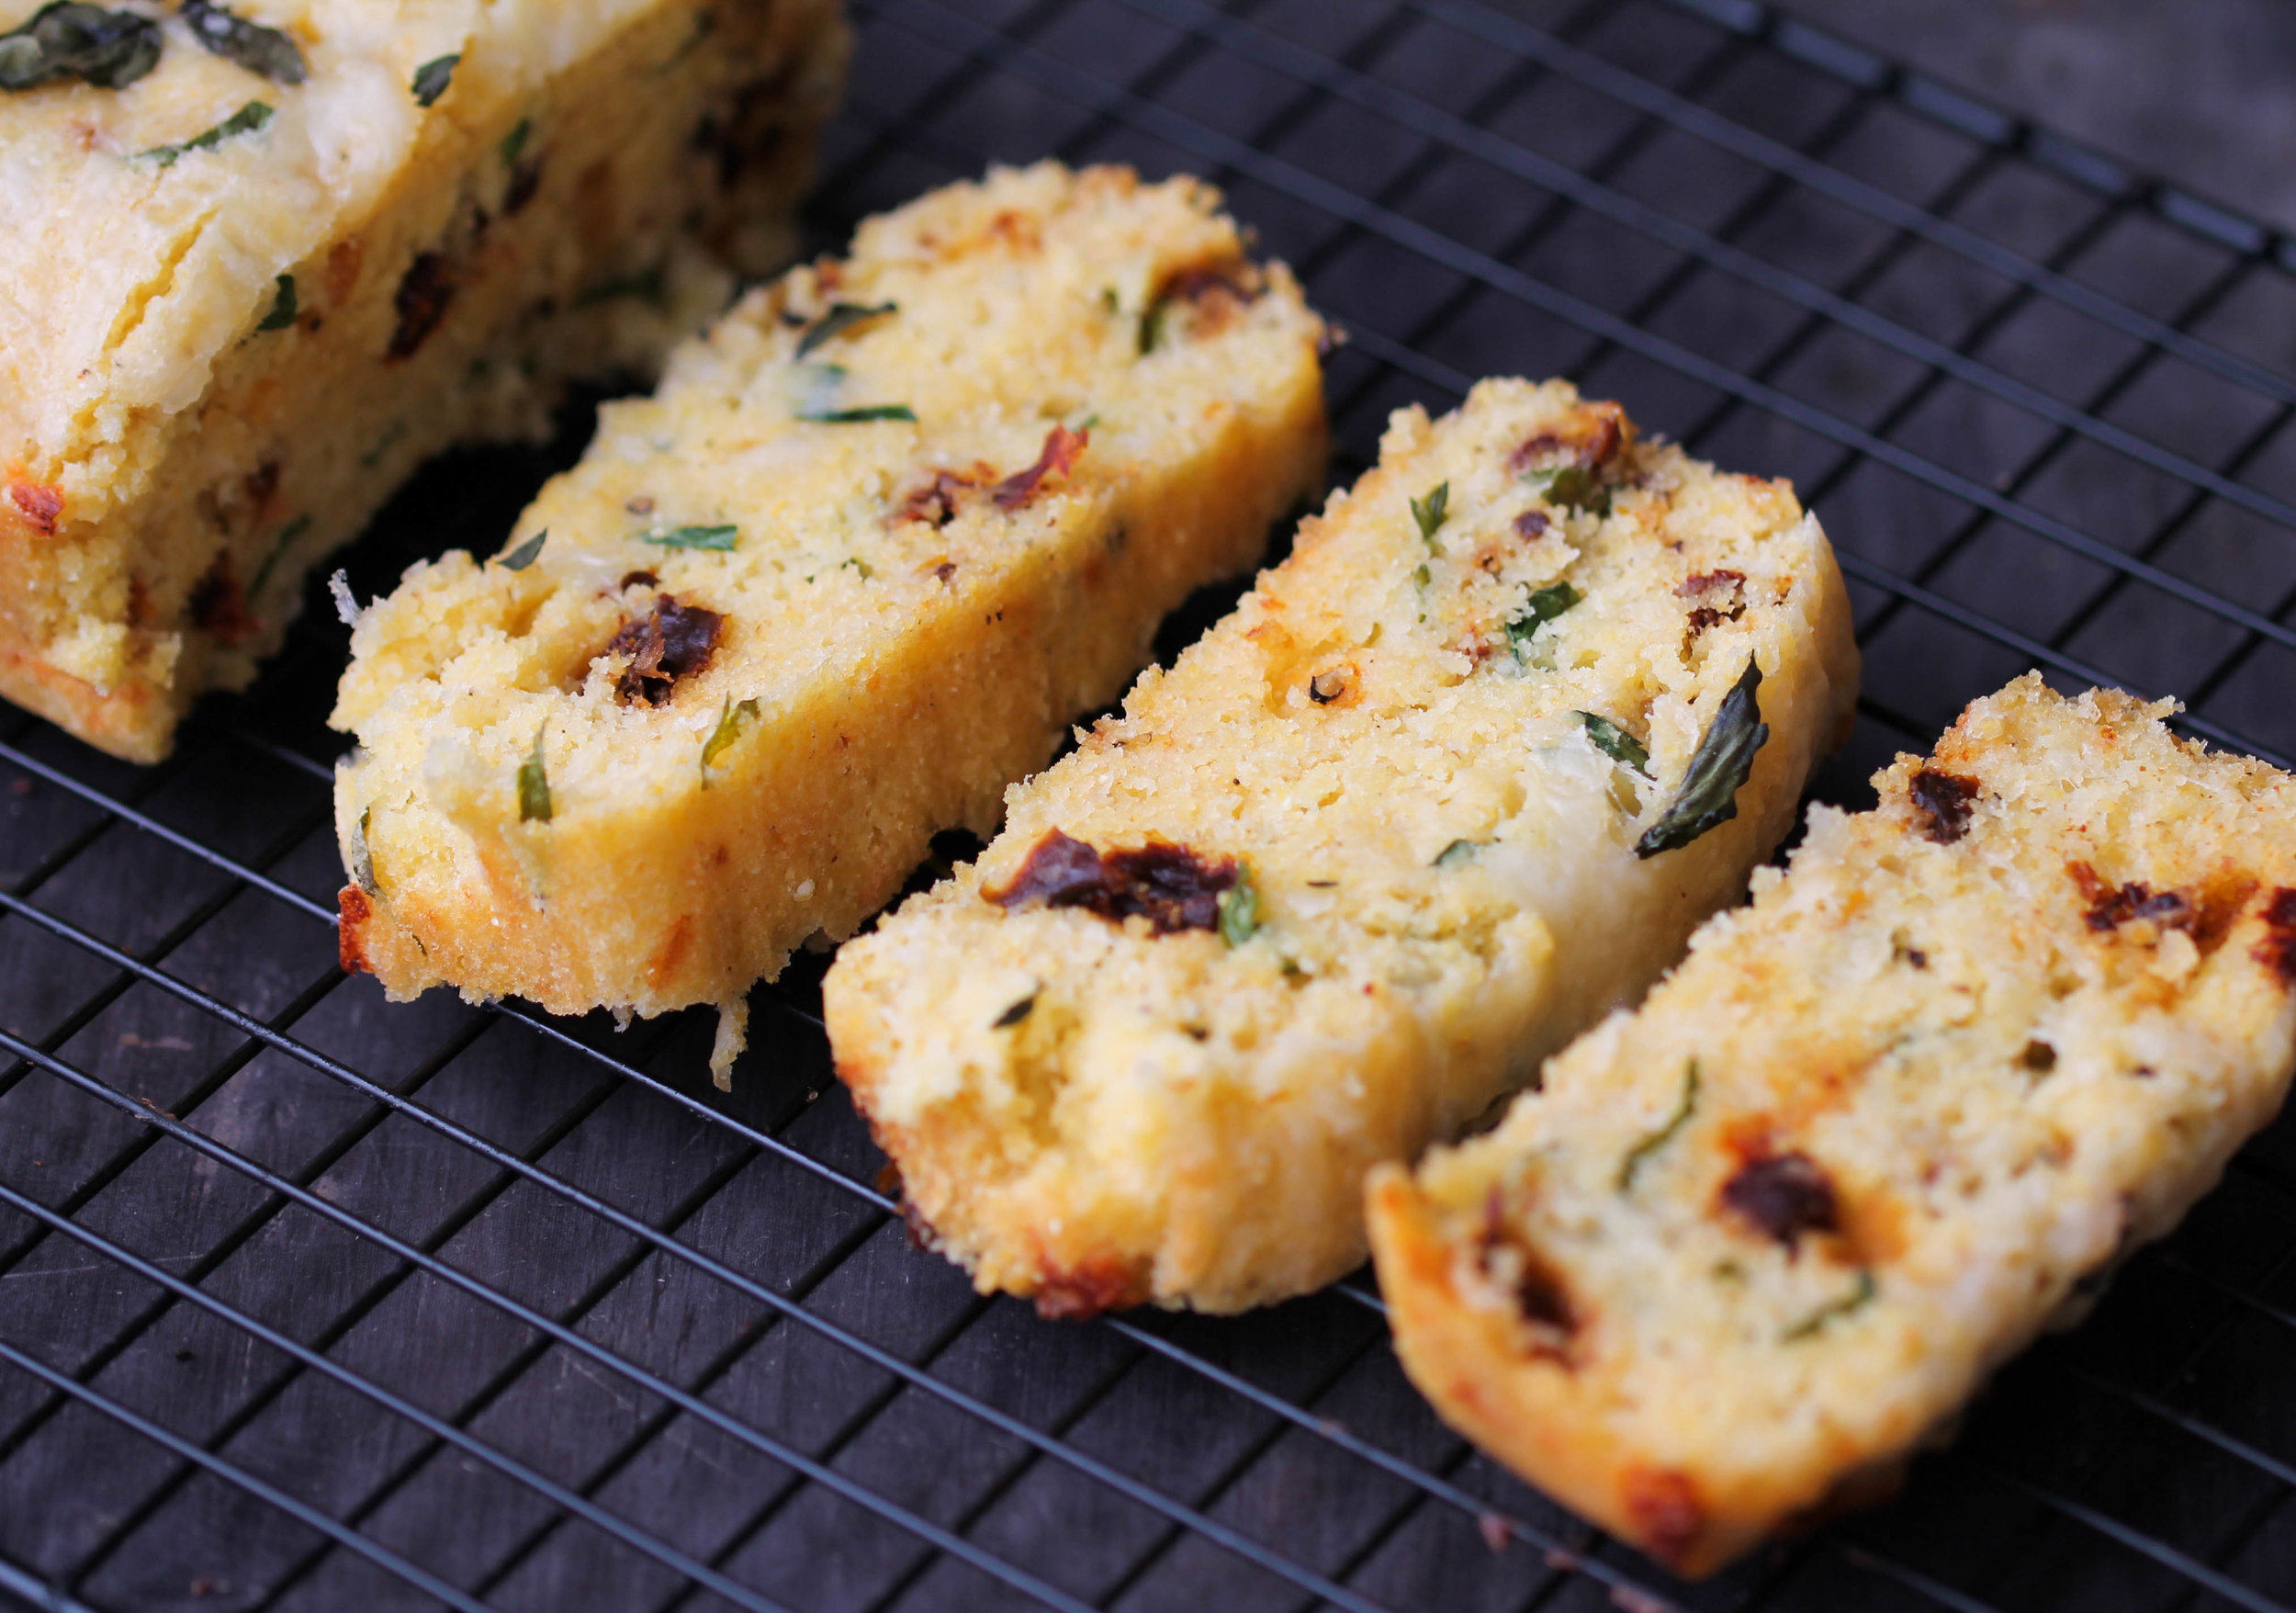 Corn Bread with Sun-Dried Tomatoes, Basil, and Cheese - delicious, fluffy, and easy recipe that everyone will enjoy as a side, with chili, or by itself!